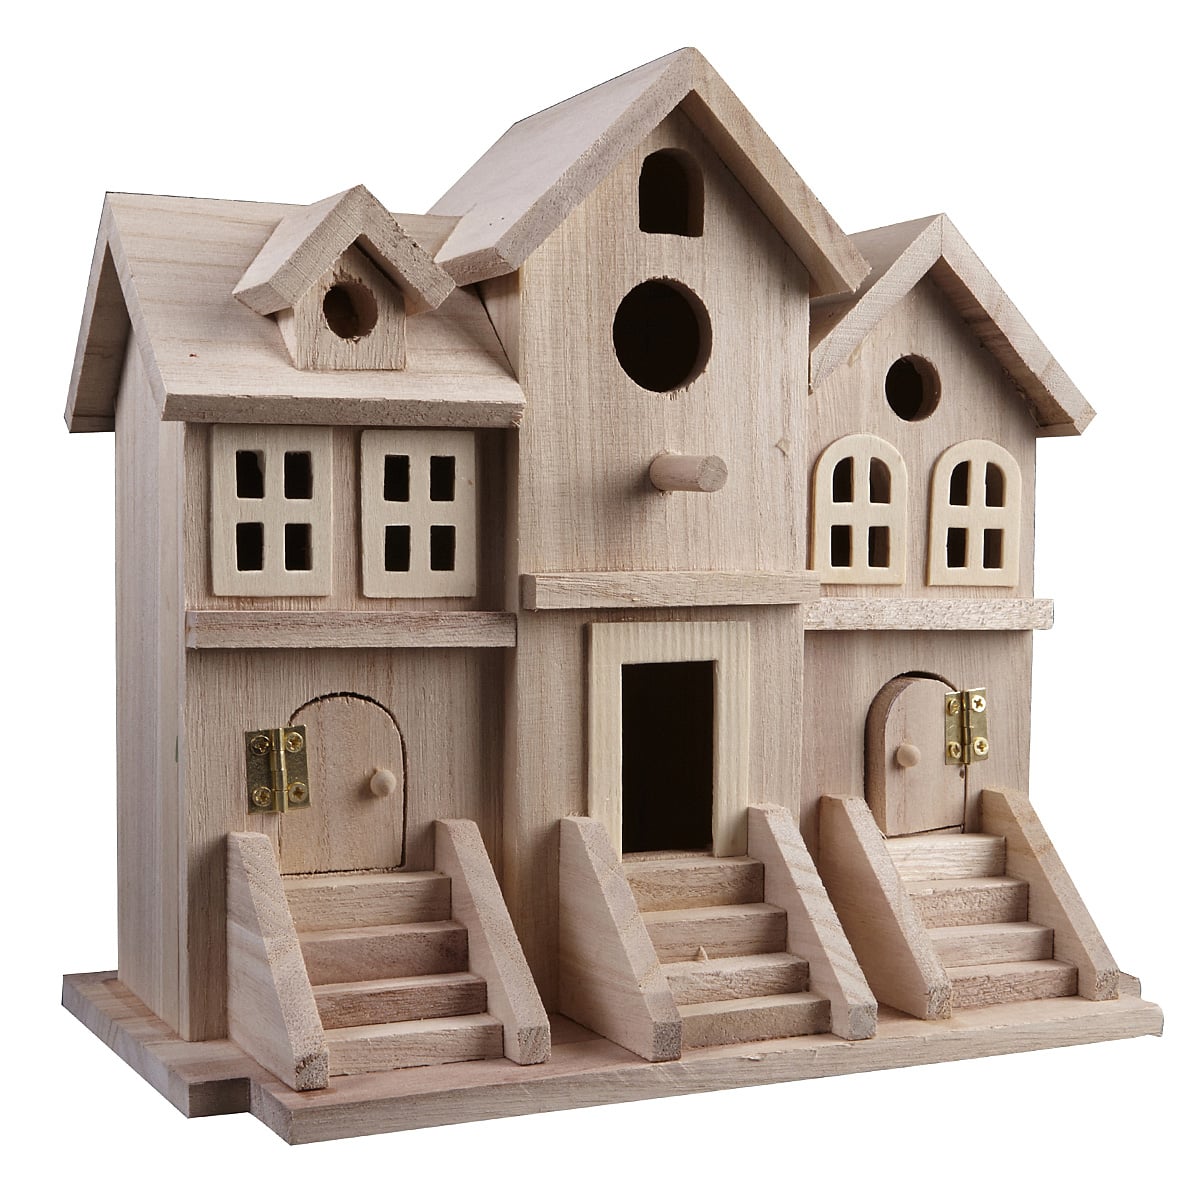 Brownstone Birdhouse By ArtMinds 